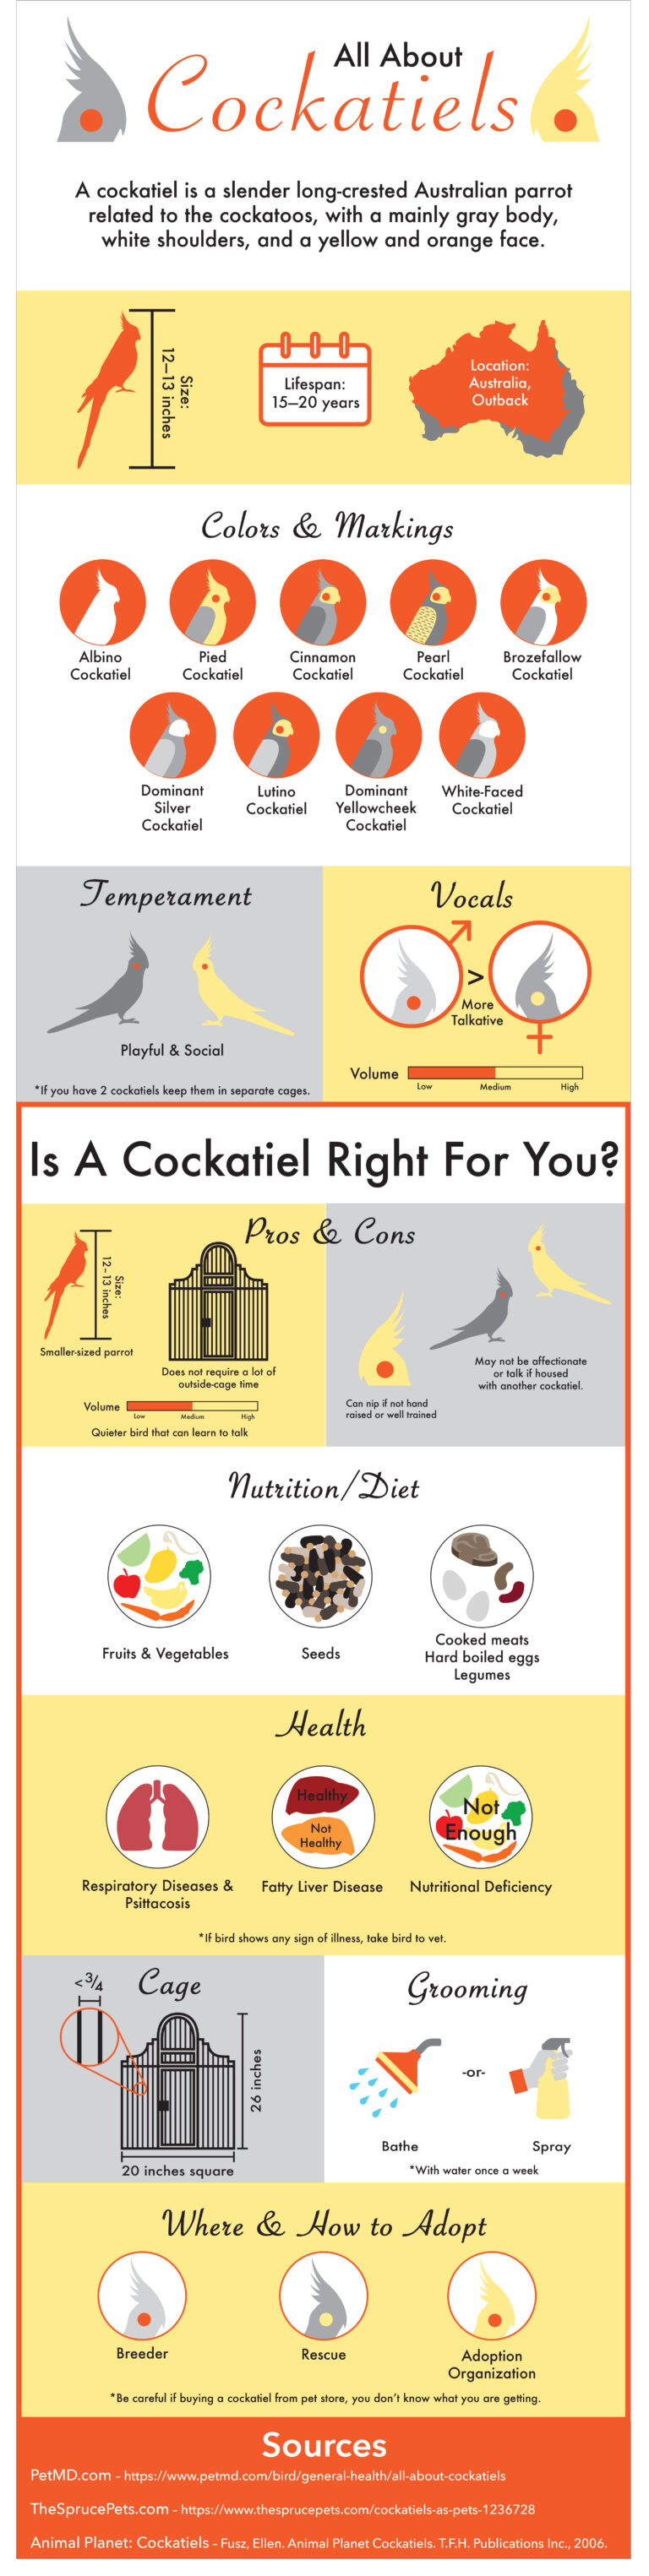 "All About Cockatiels" Infographic Previous Version